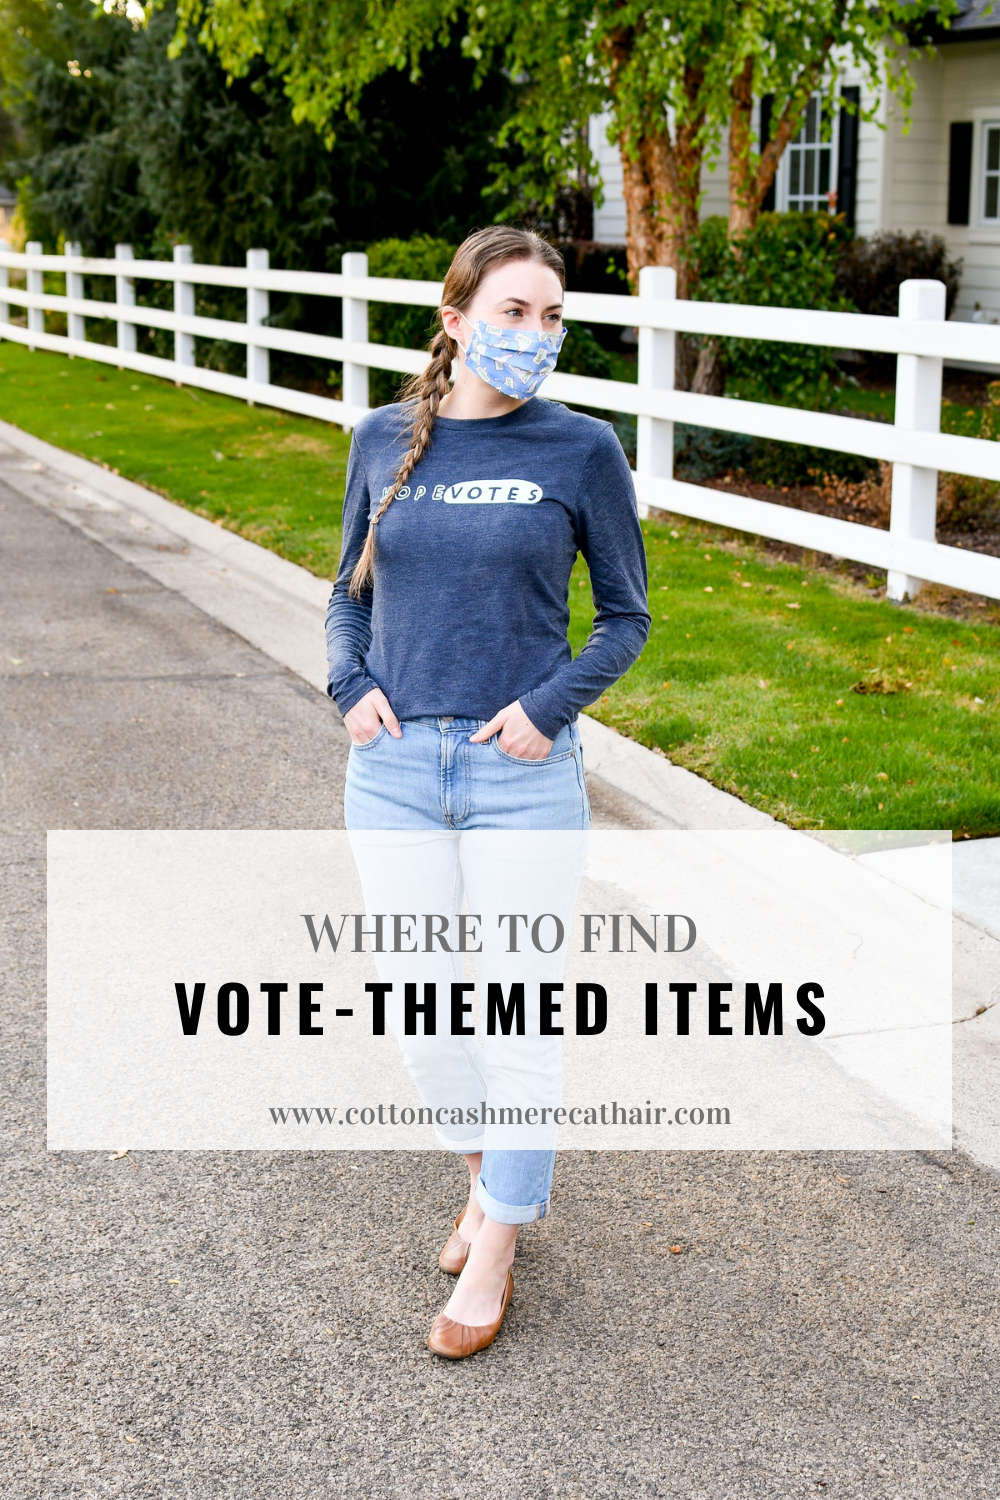 where to find vote-themed tees and other items